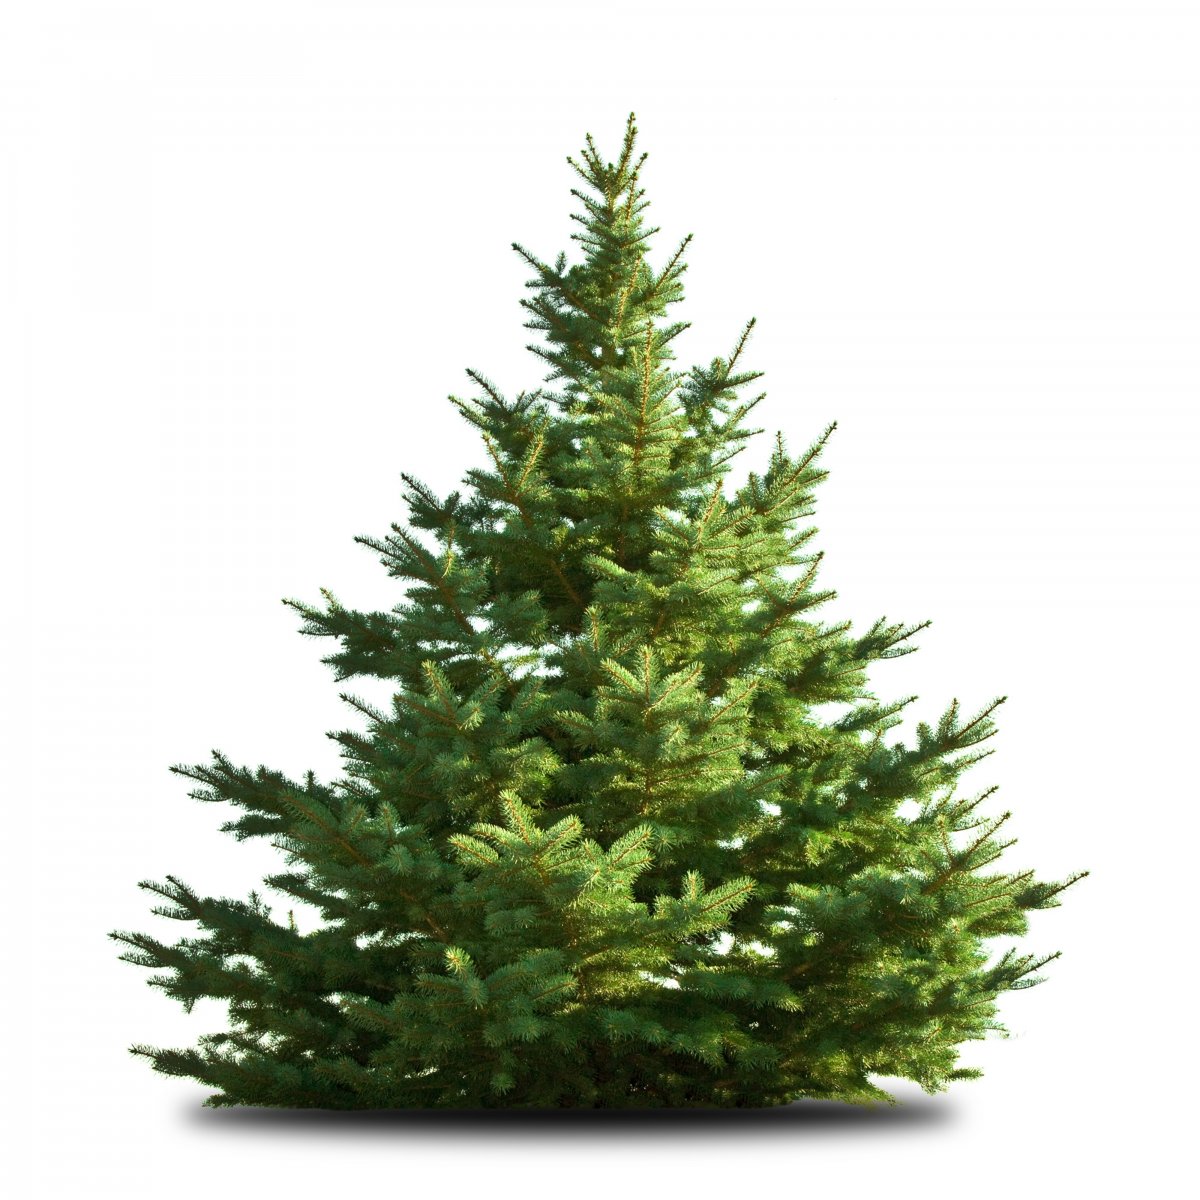 fir tree pictures